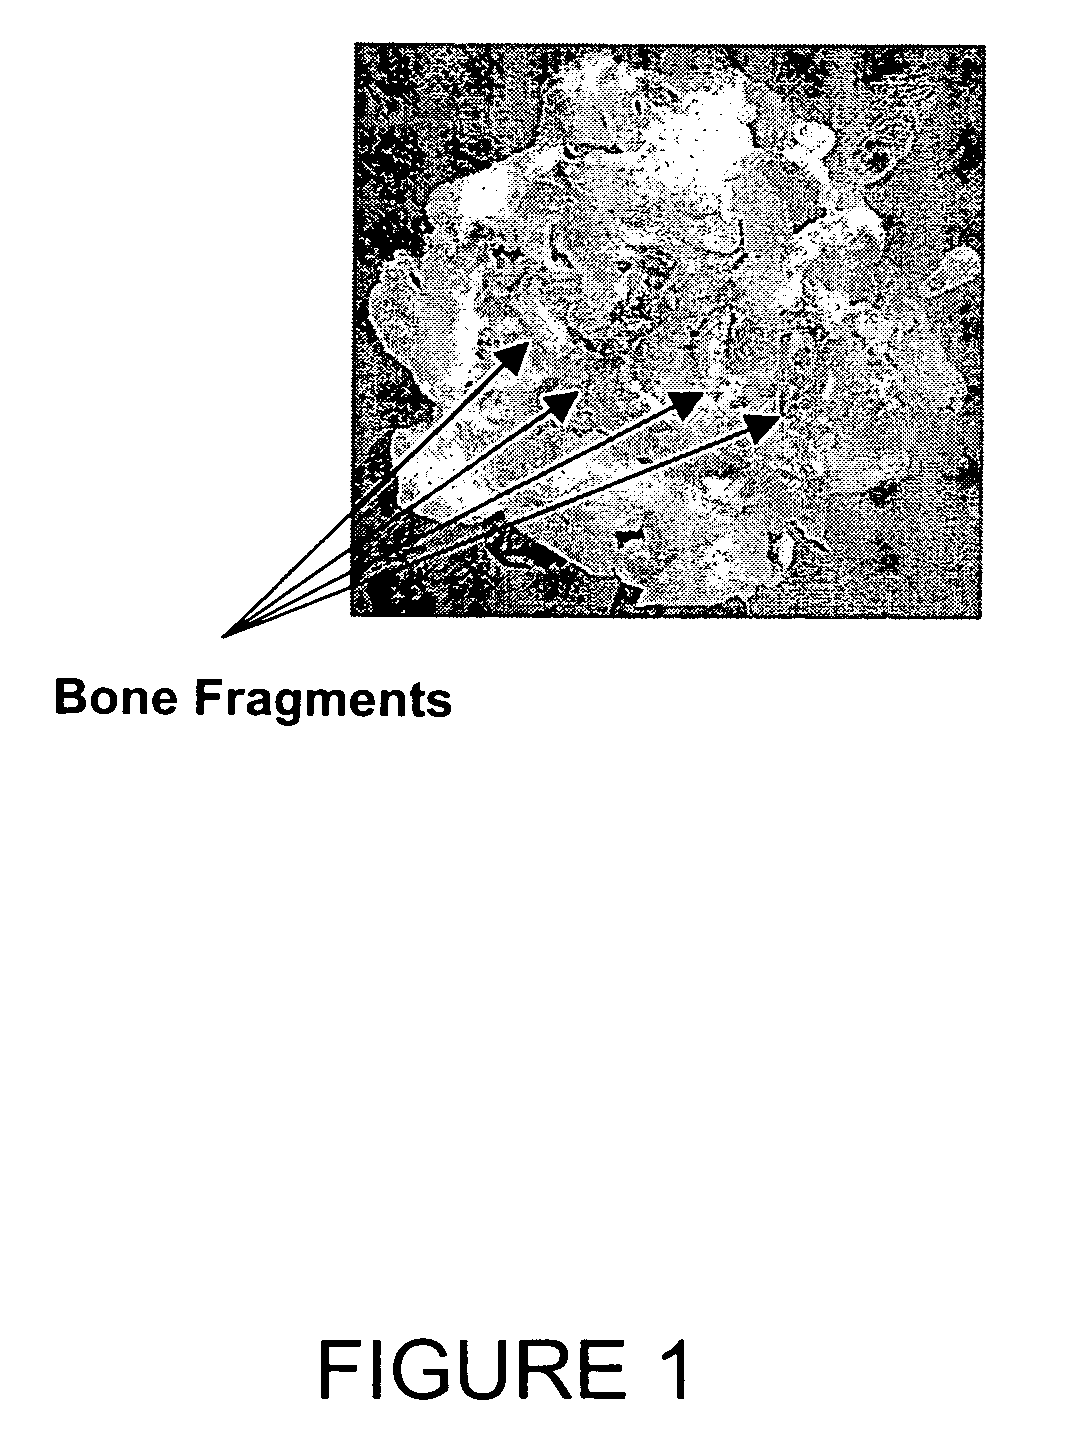 Method to detect bone fragments during the processing of meat or fish